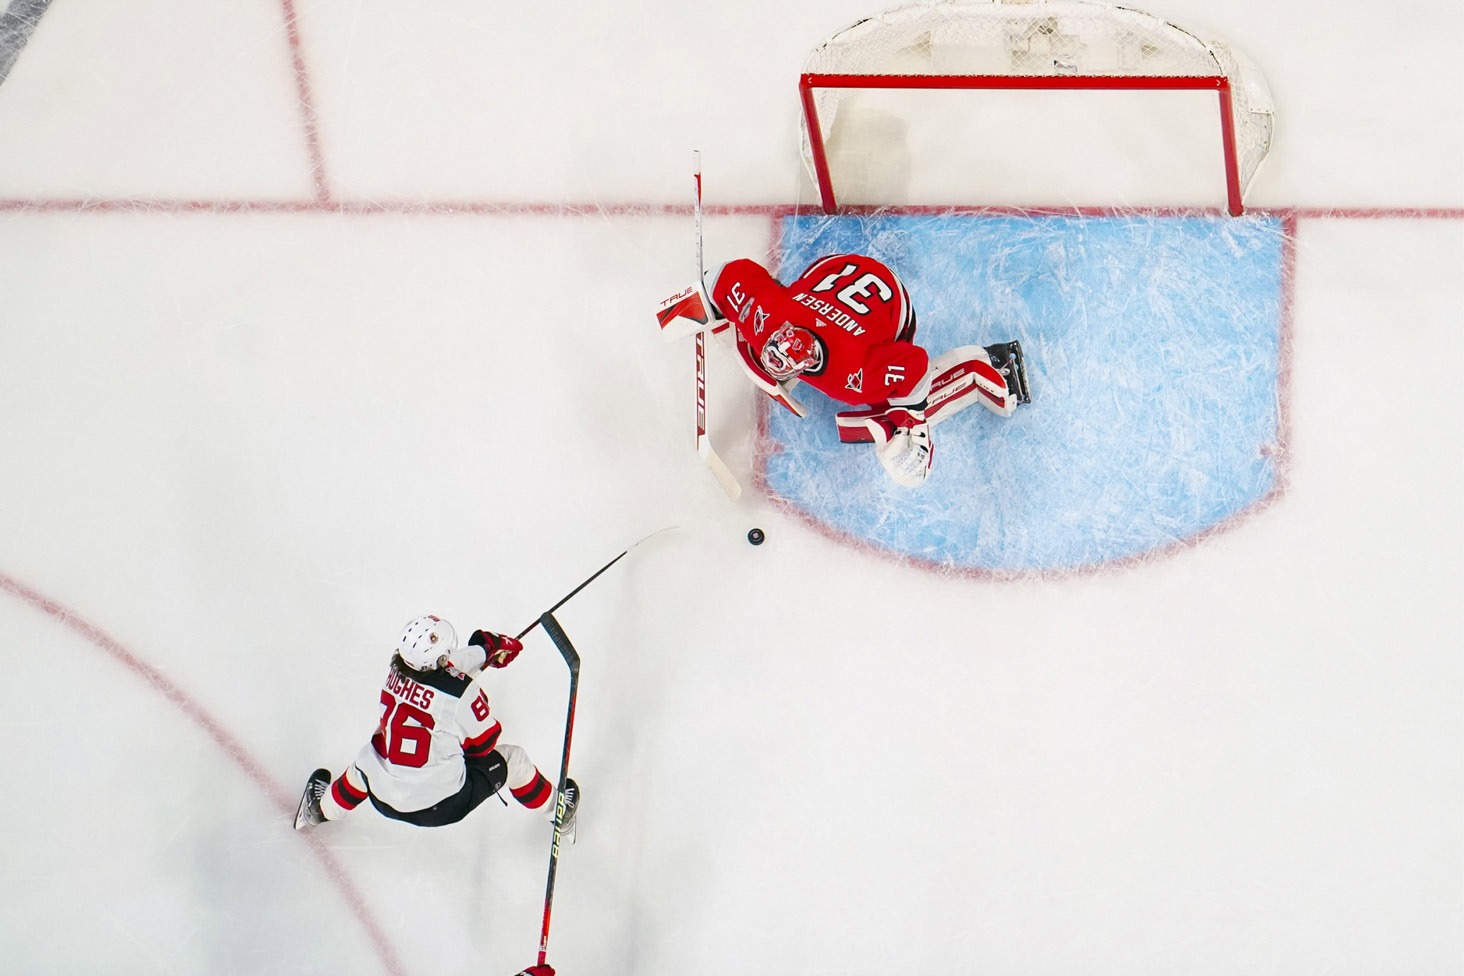 Overhead image of a goal in NHL